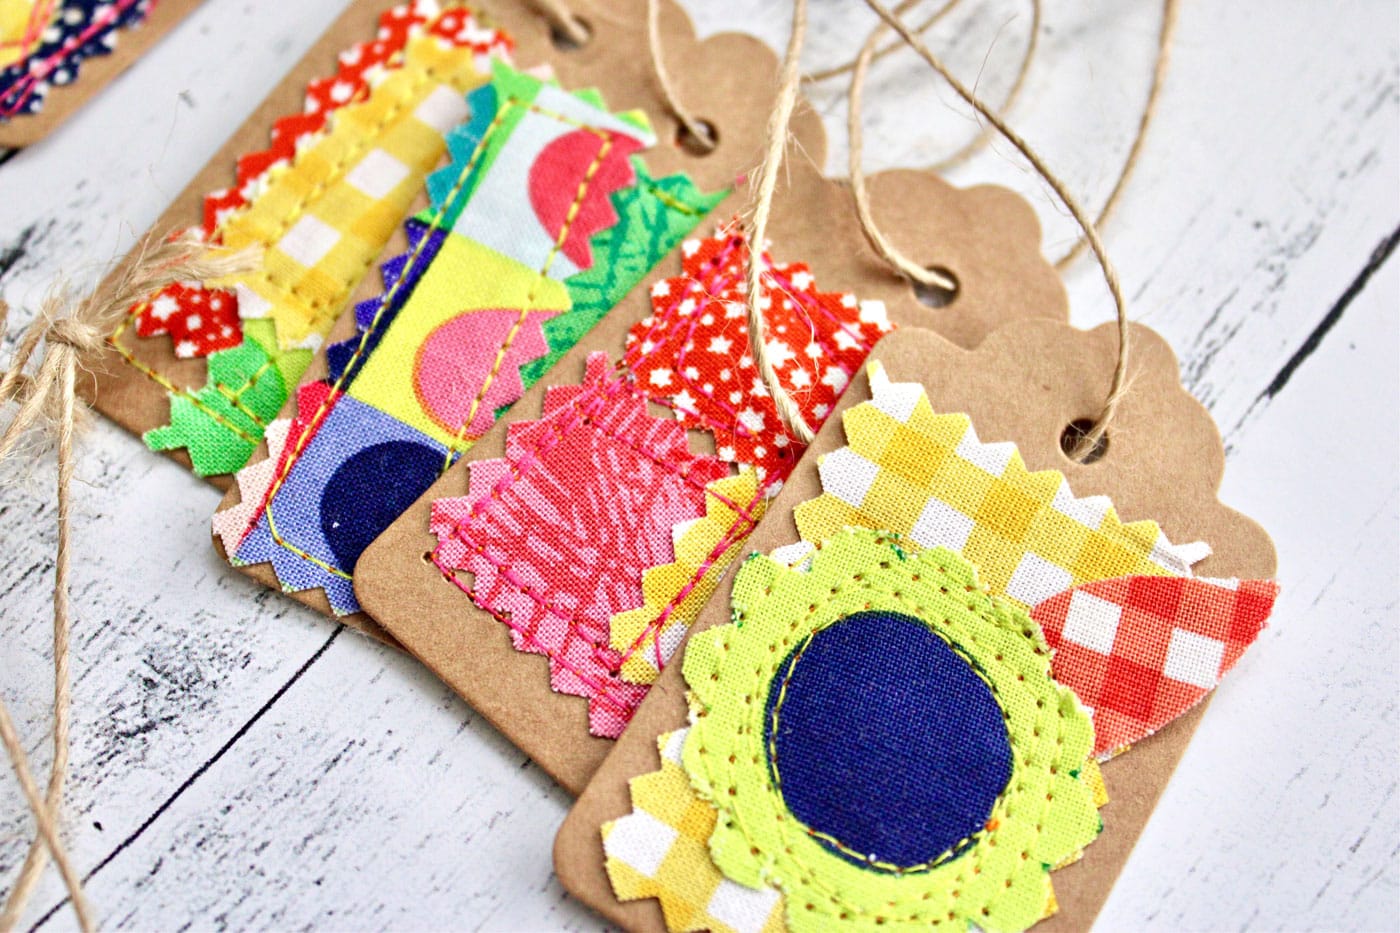 colorful fabric and paper gift tags on white wood table